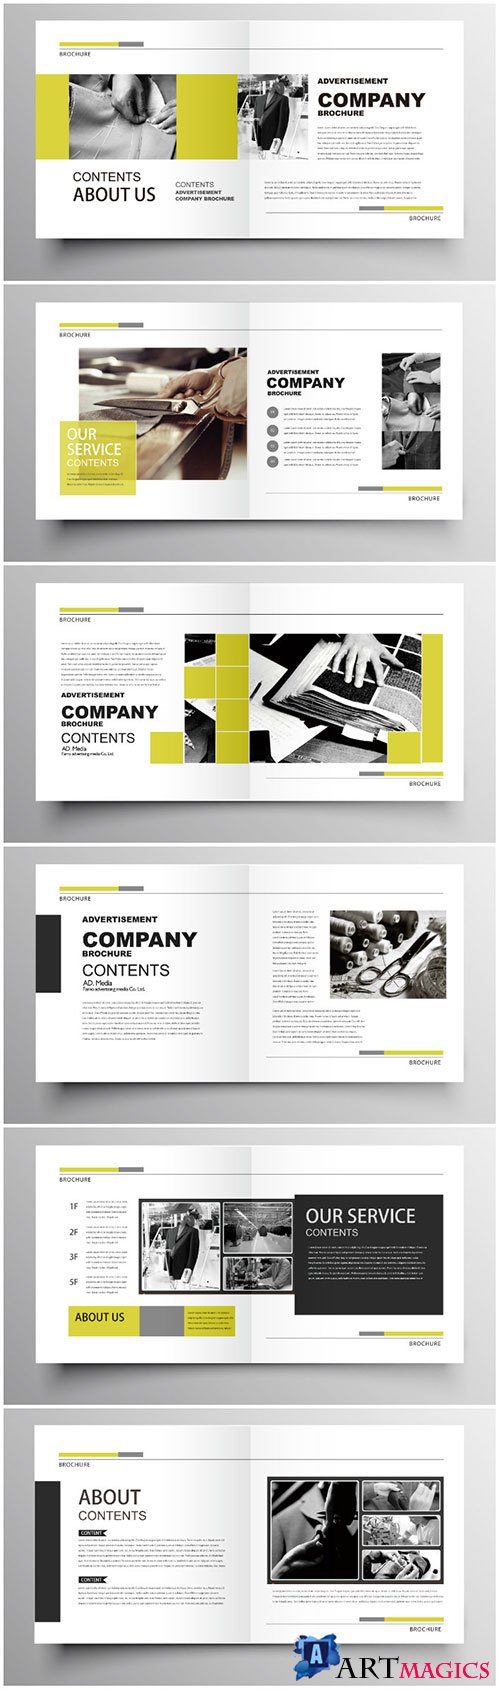 Brochure template vector layout design, corporate business annual report, magazine, flyer mockup # 189